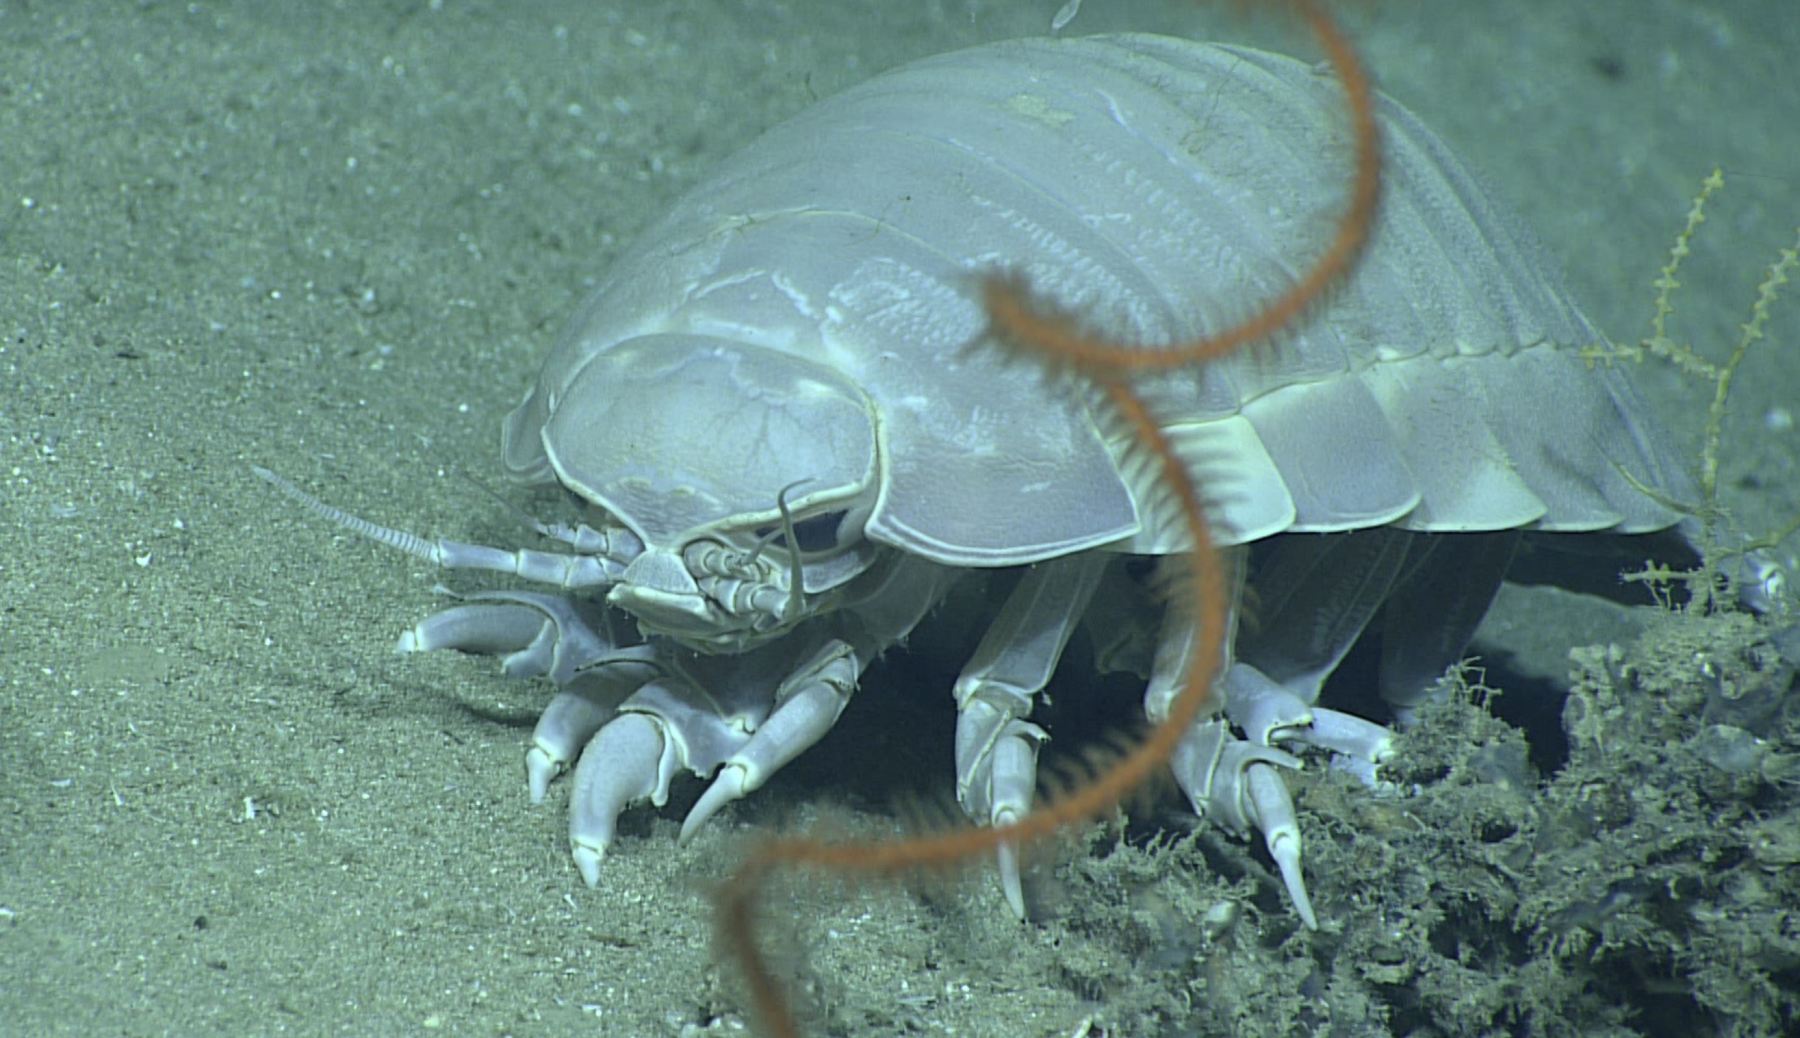 A giant deep-sea isopod, Bathynomus giganteus, with an antipatharian whip coral, Stichopathes sp., in the foreground, seen during the Gulf of Mexico 2017 expedition. While the isopod imaged here was spotted during exploration of a site dubbed “Okeanos Ridge,” Image courtesy of the NOAA Office of Ocean Exploration and Research, Gulf of Mexico 2017. "Giant Isopod" by NOAA Ocean Exploration & Research is licensed under CC BY-SA 2.0.